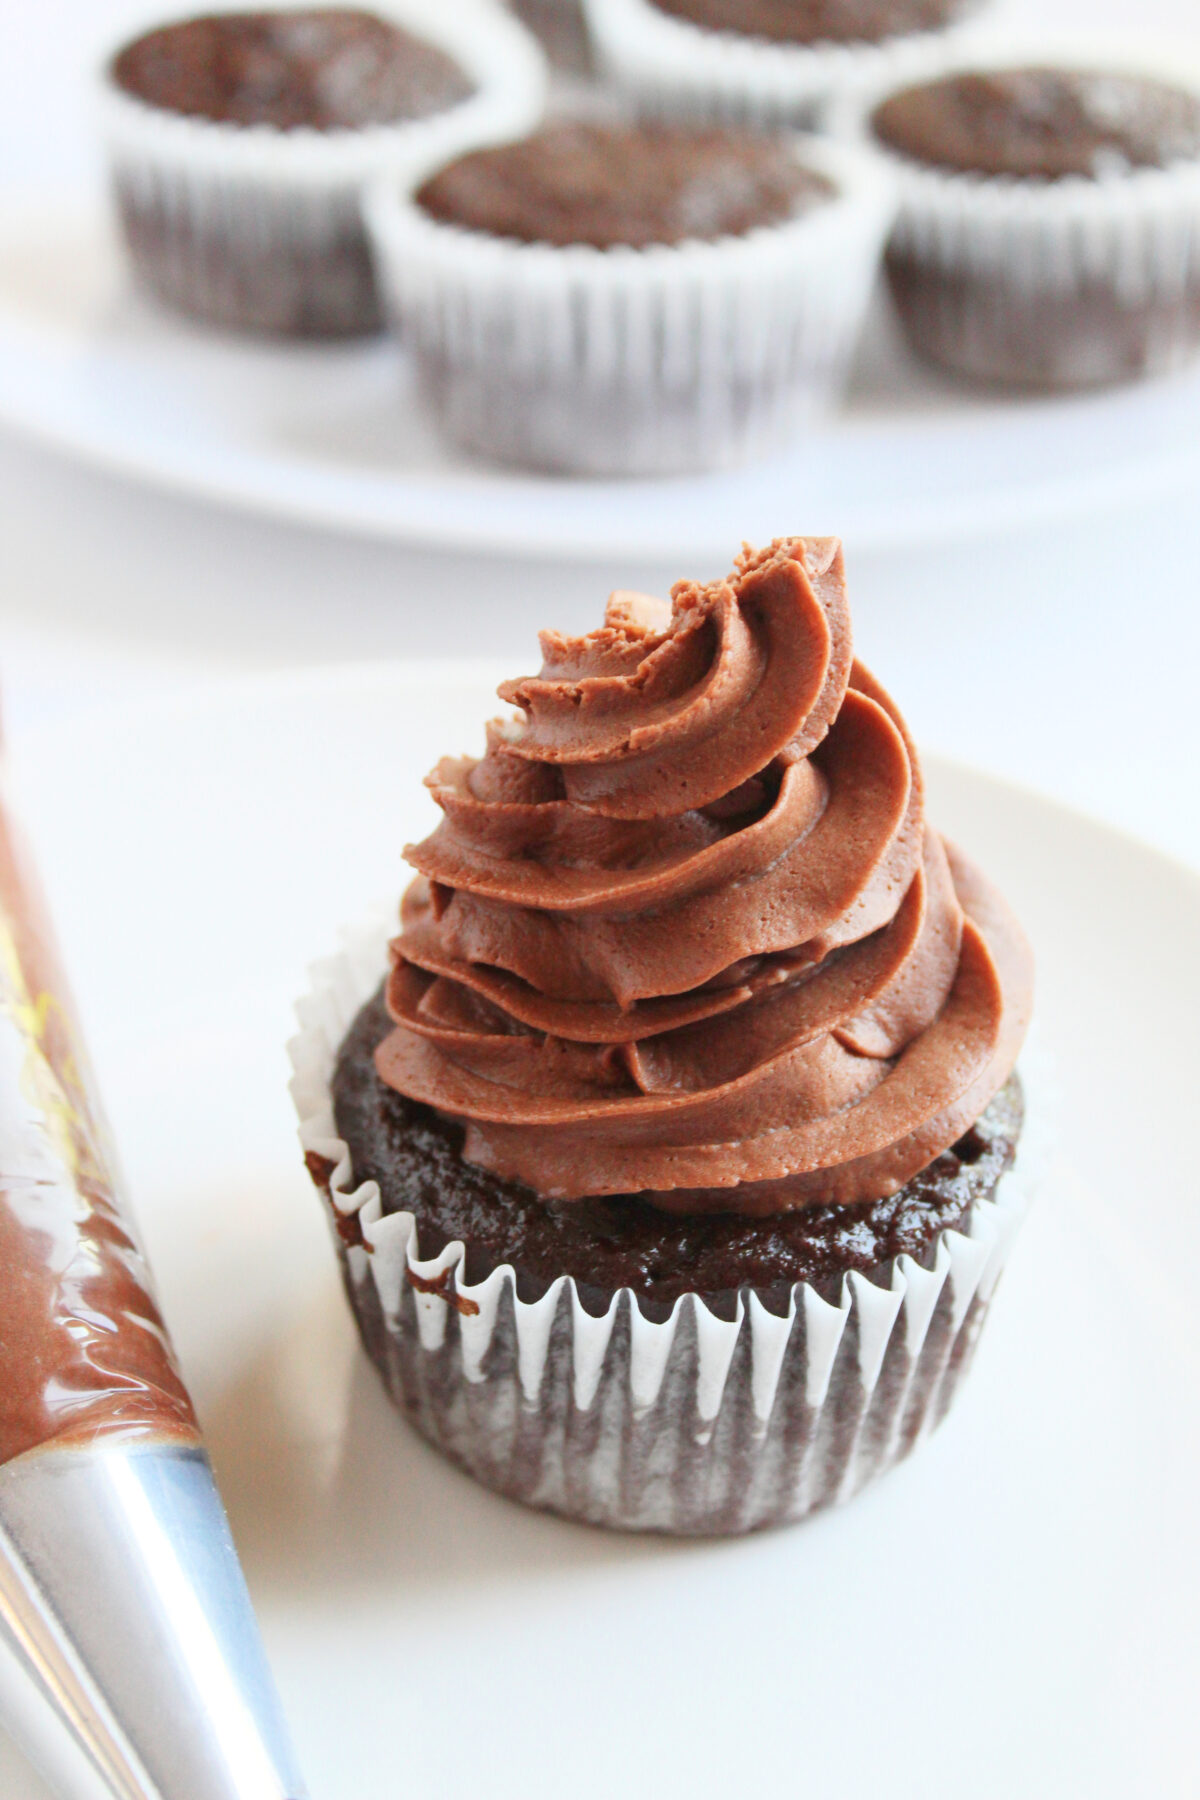 Chocolate buttercream frosting piped onto cupcakes.